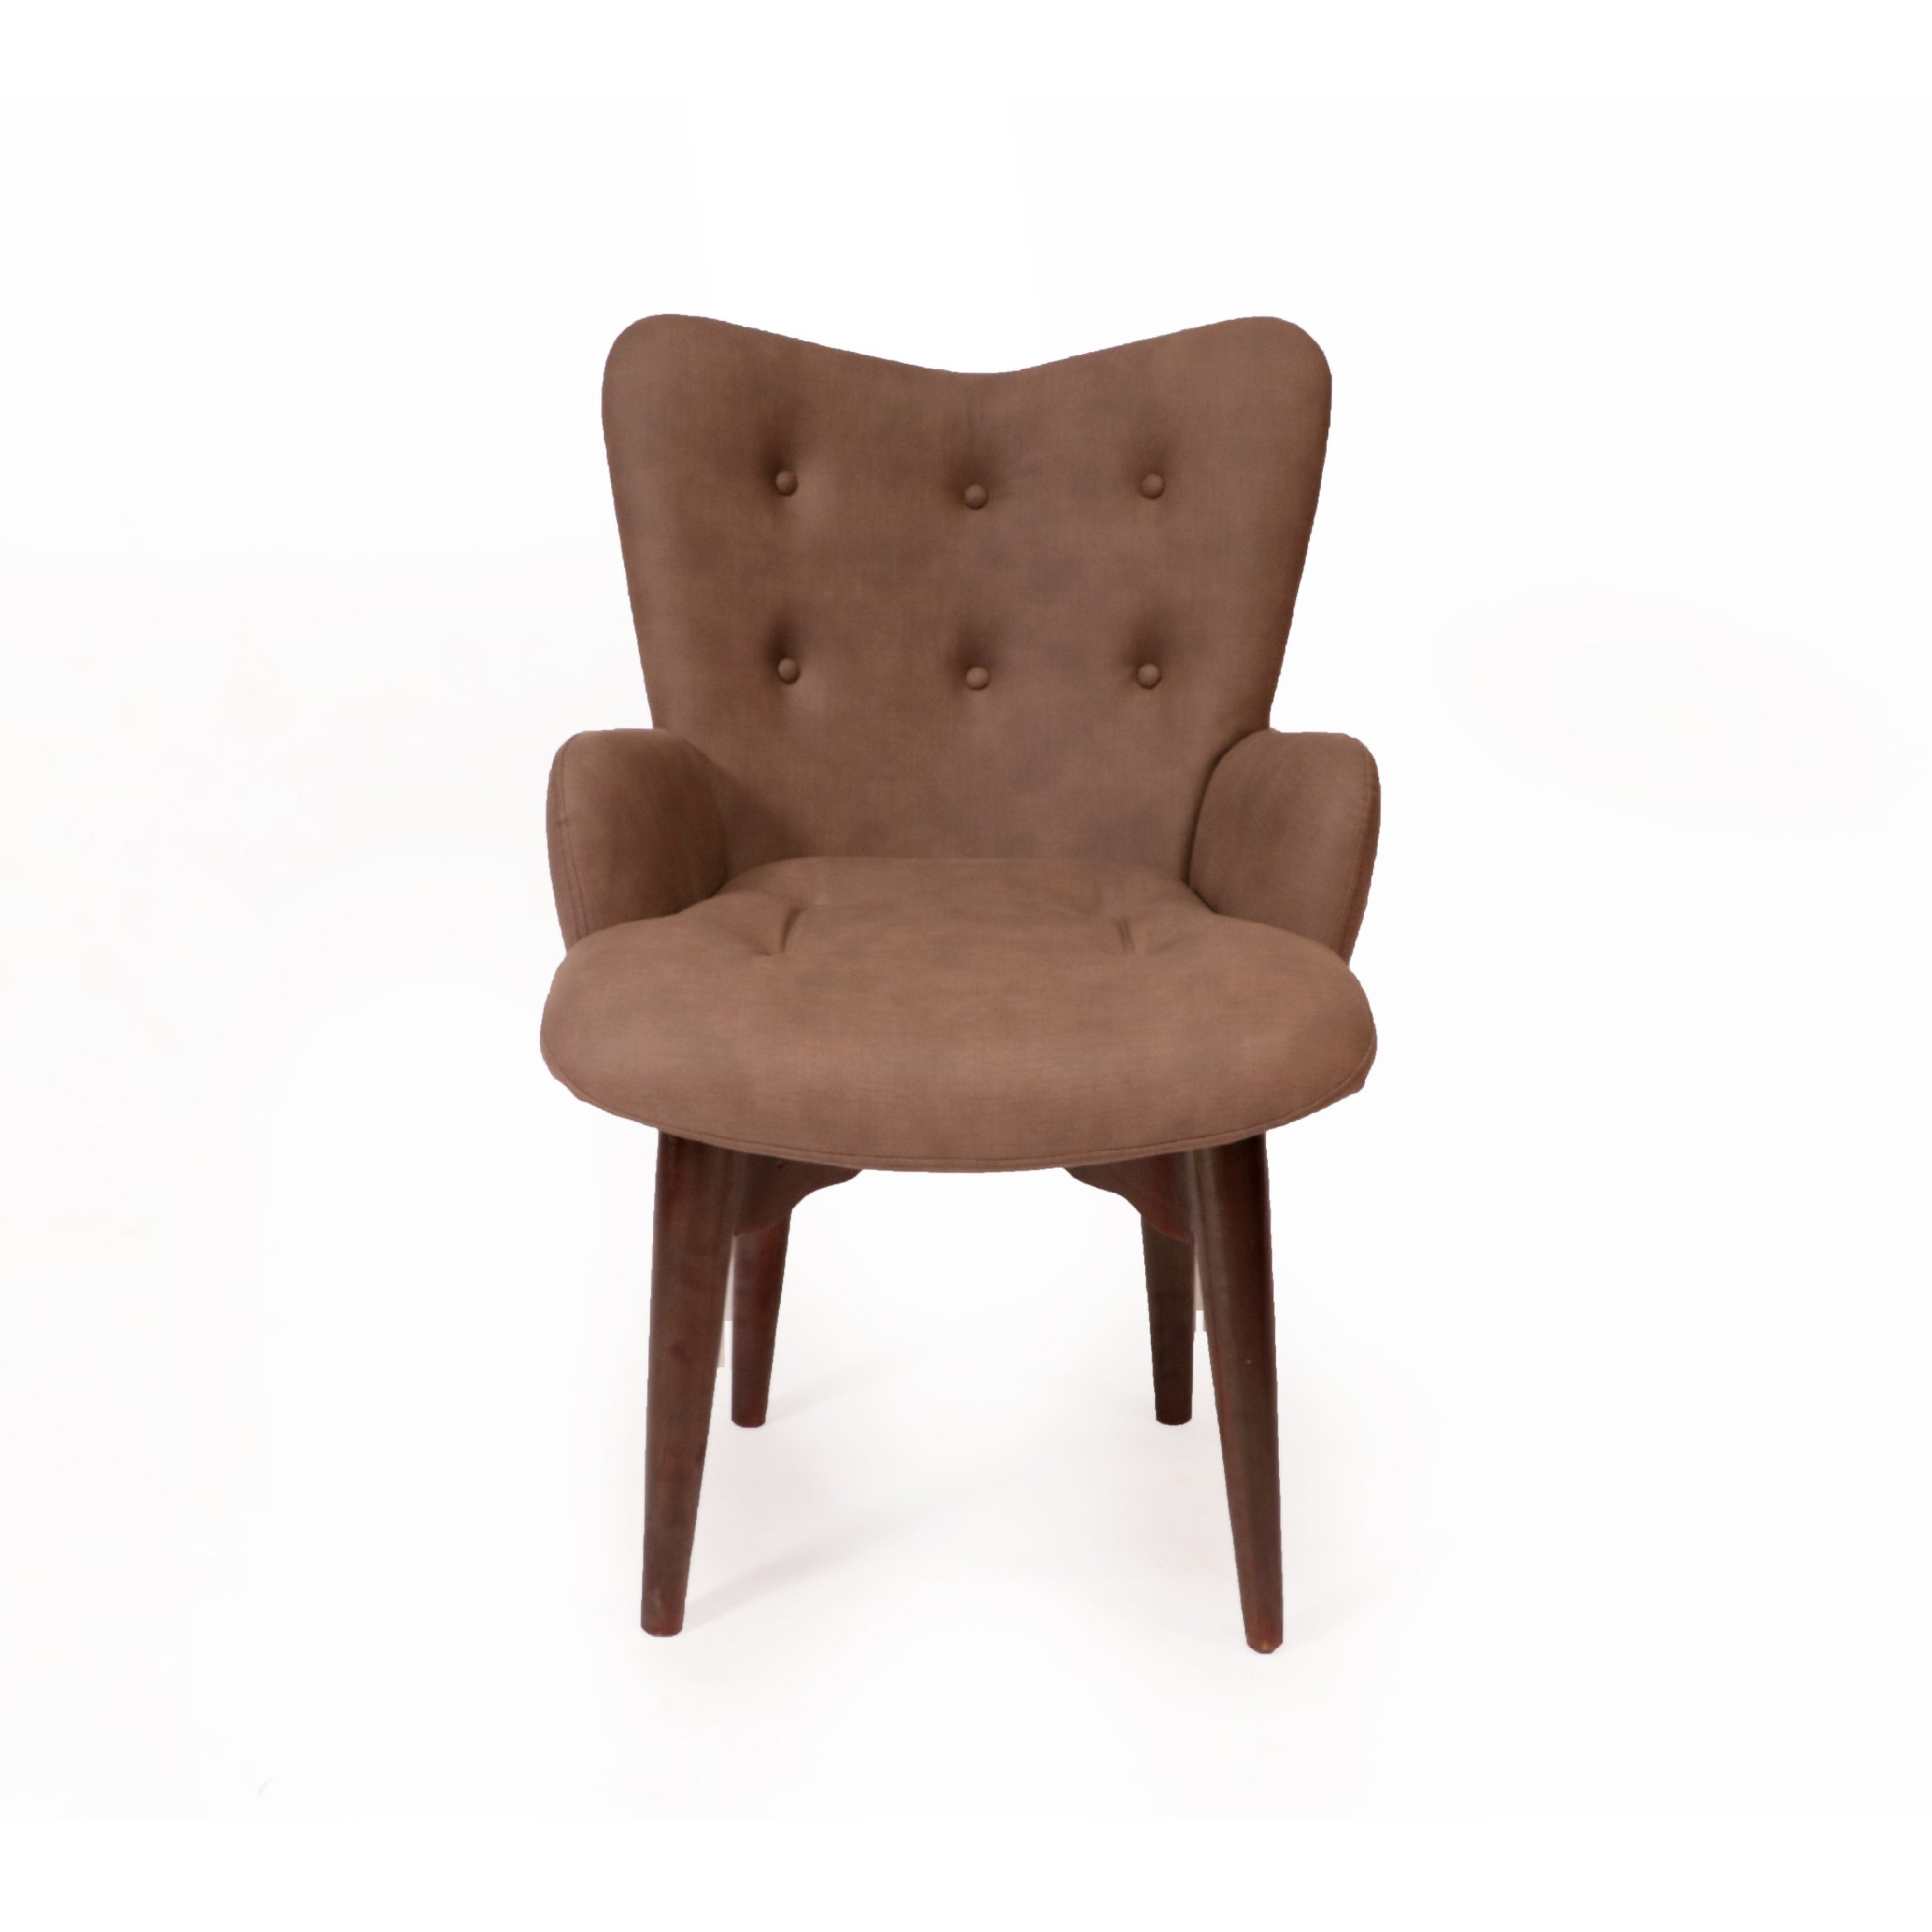 Upholstered Contemporary Chair Arm Chair